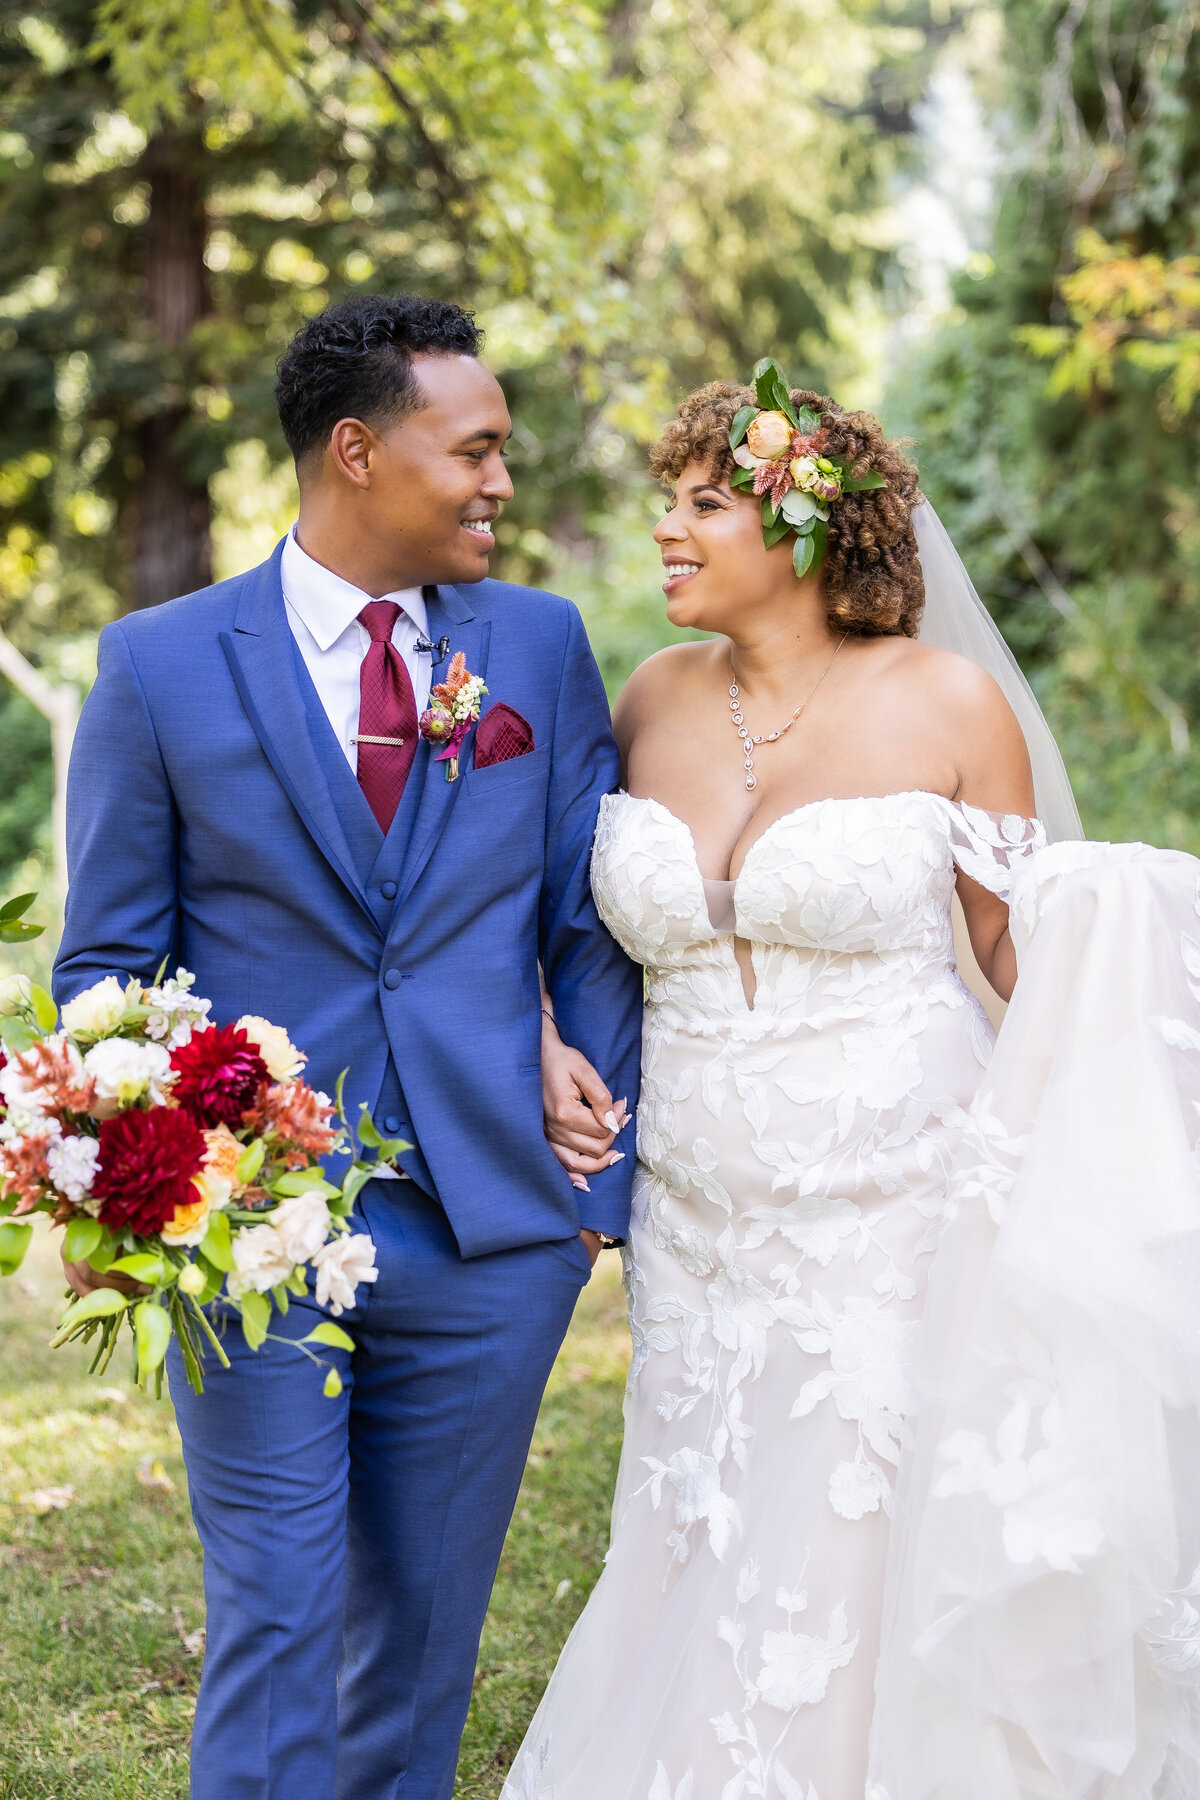 Bride and groom walk while looking at each other. Groom holds the bride's bouquet and bride holds the bottom of her dress and they are surrounded by greenery in the background. Photo by wedding photographer sacramento, ca philippe studio pro.